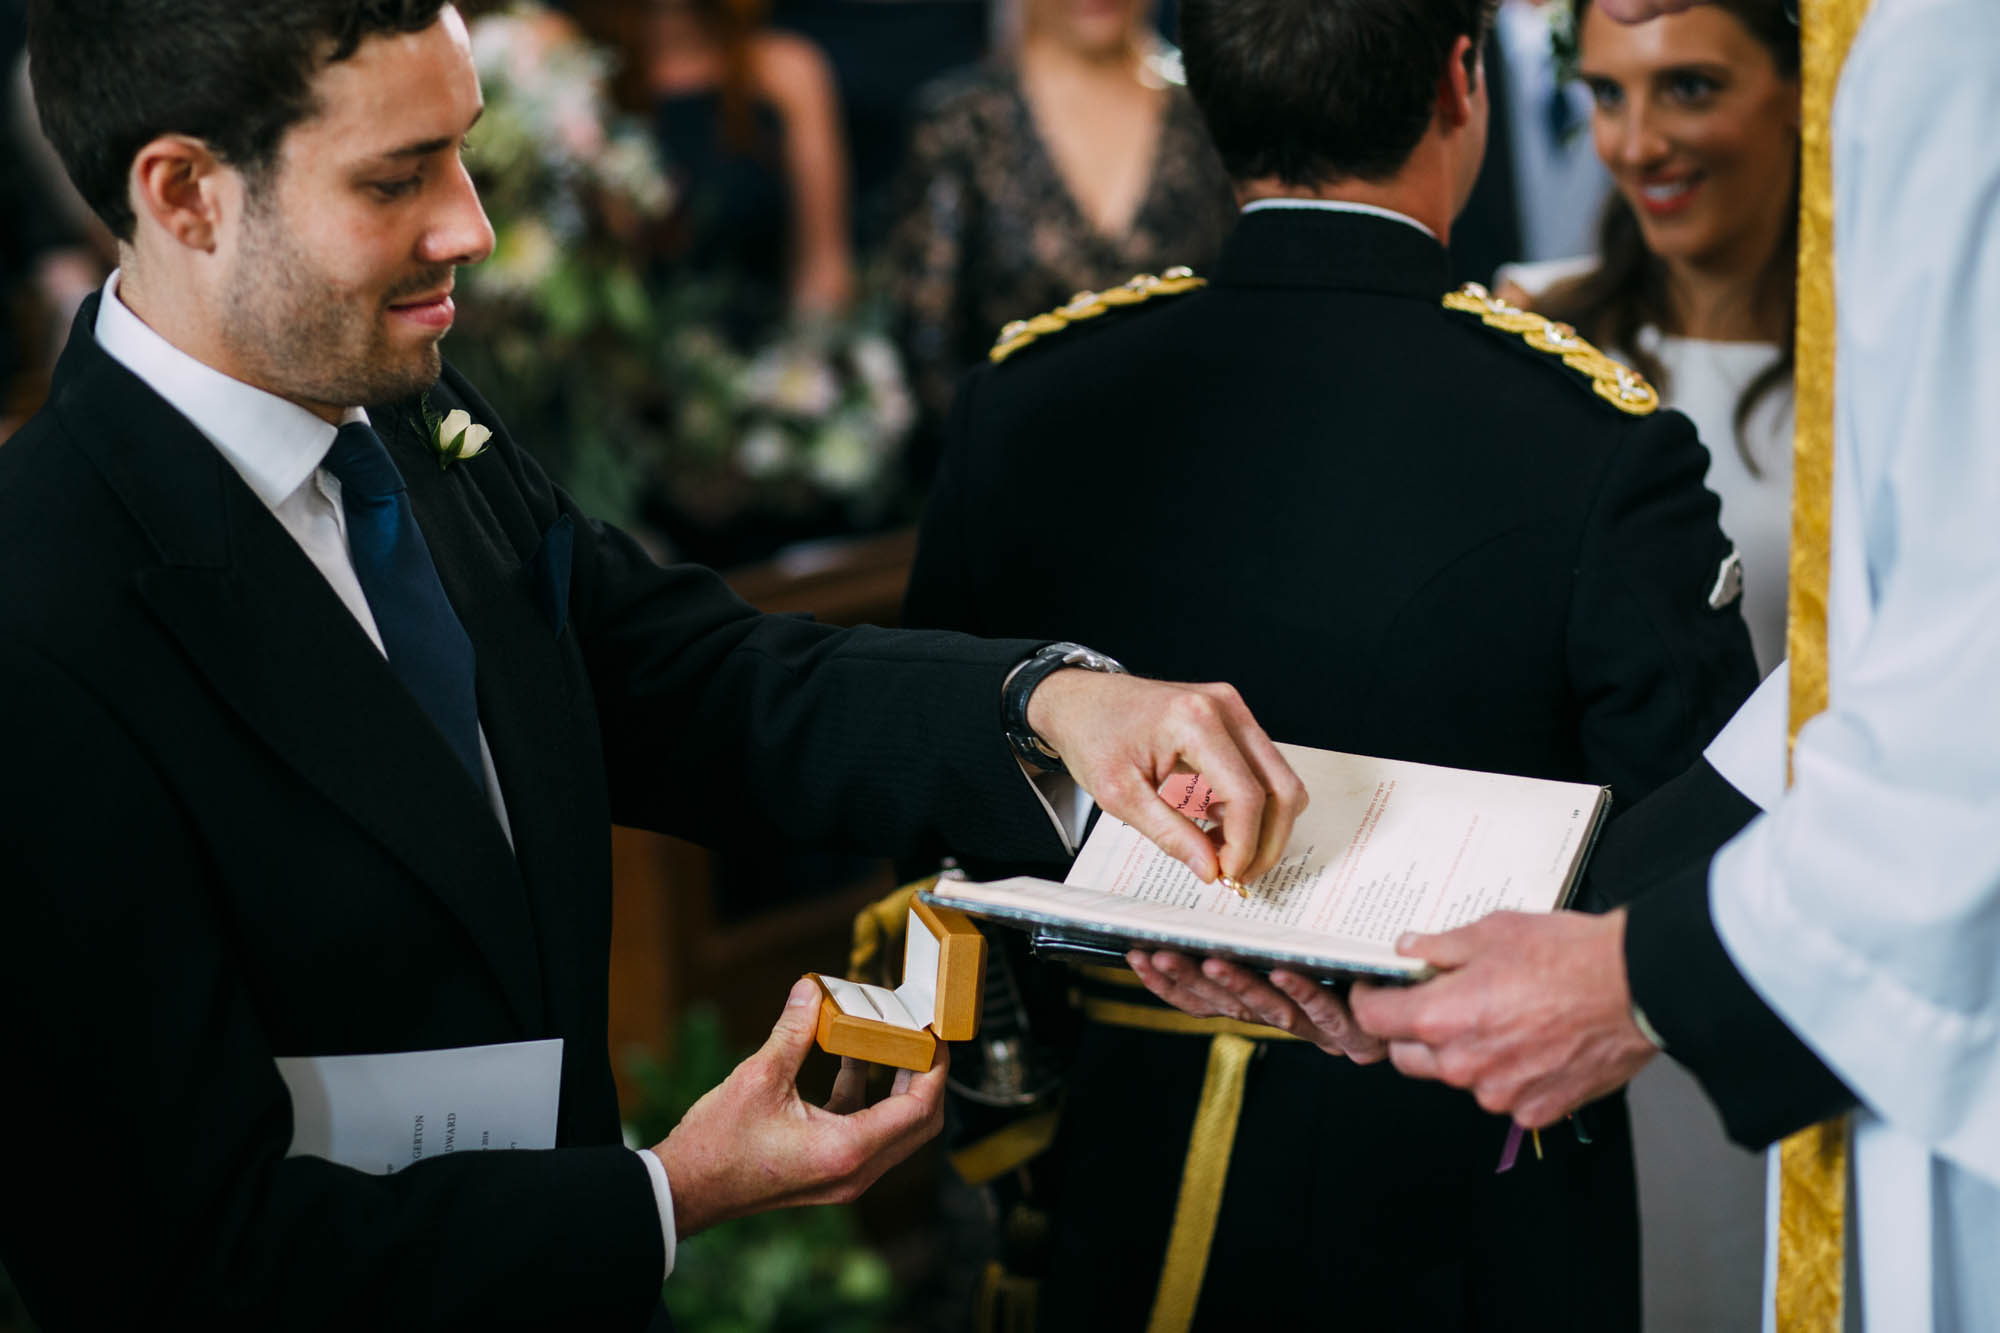 wedding rings being given to padre